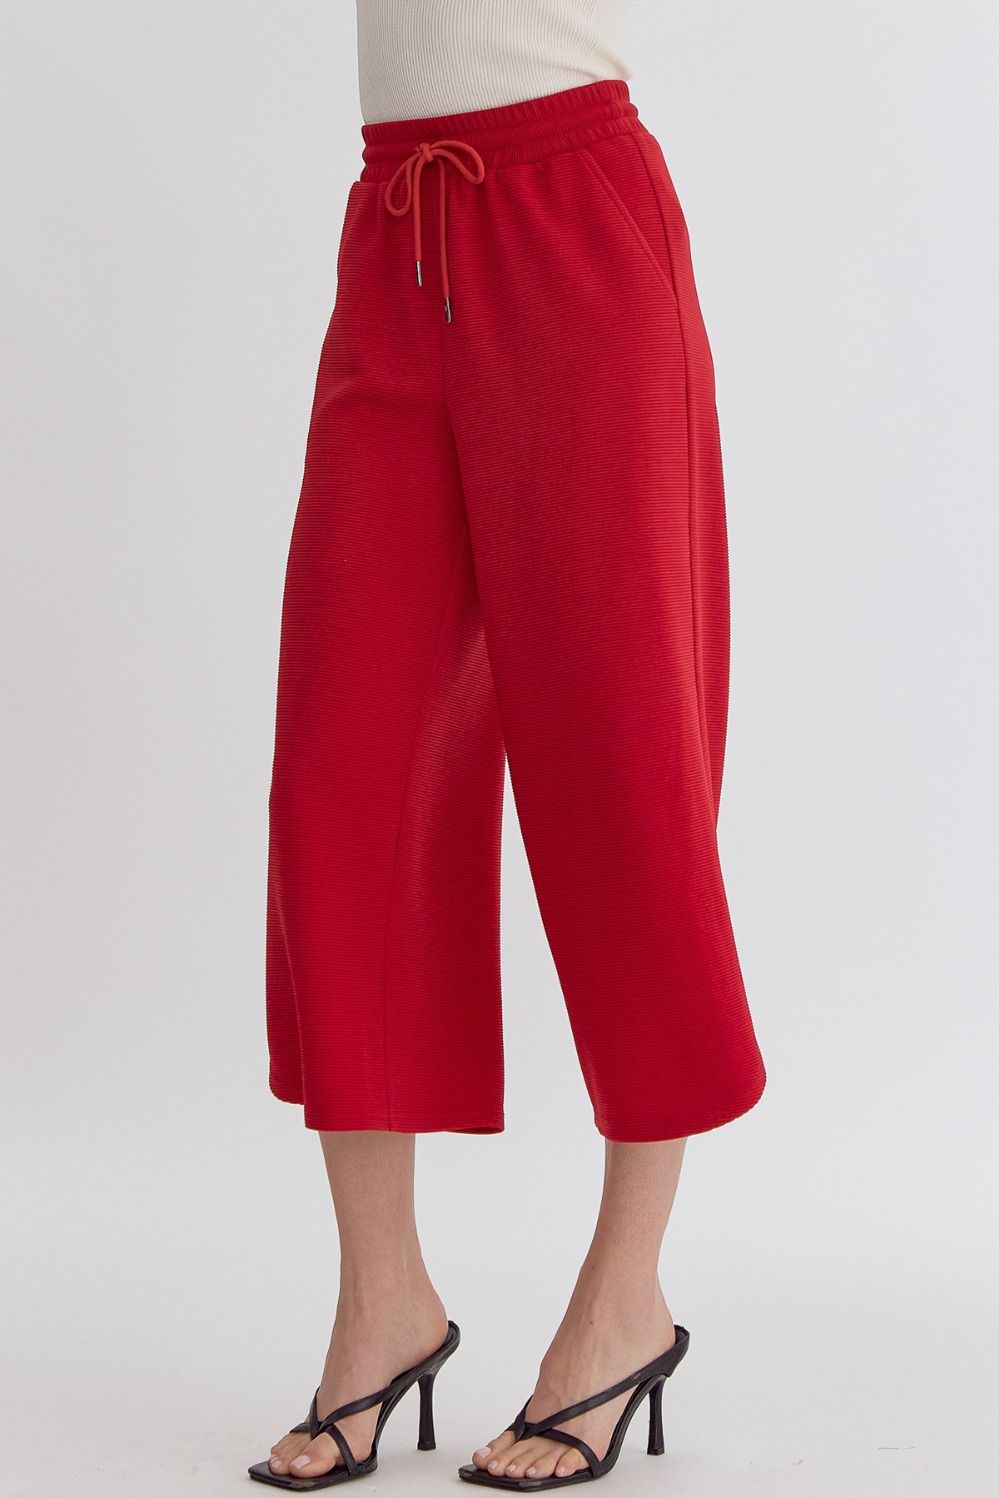 Red Textured Pant - Brazos Avenue Market 